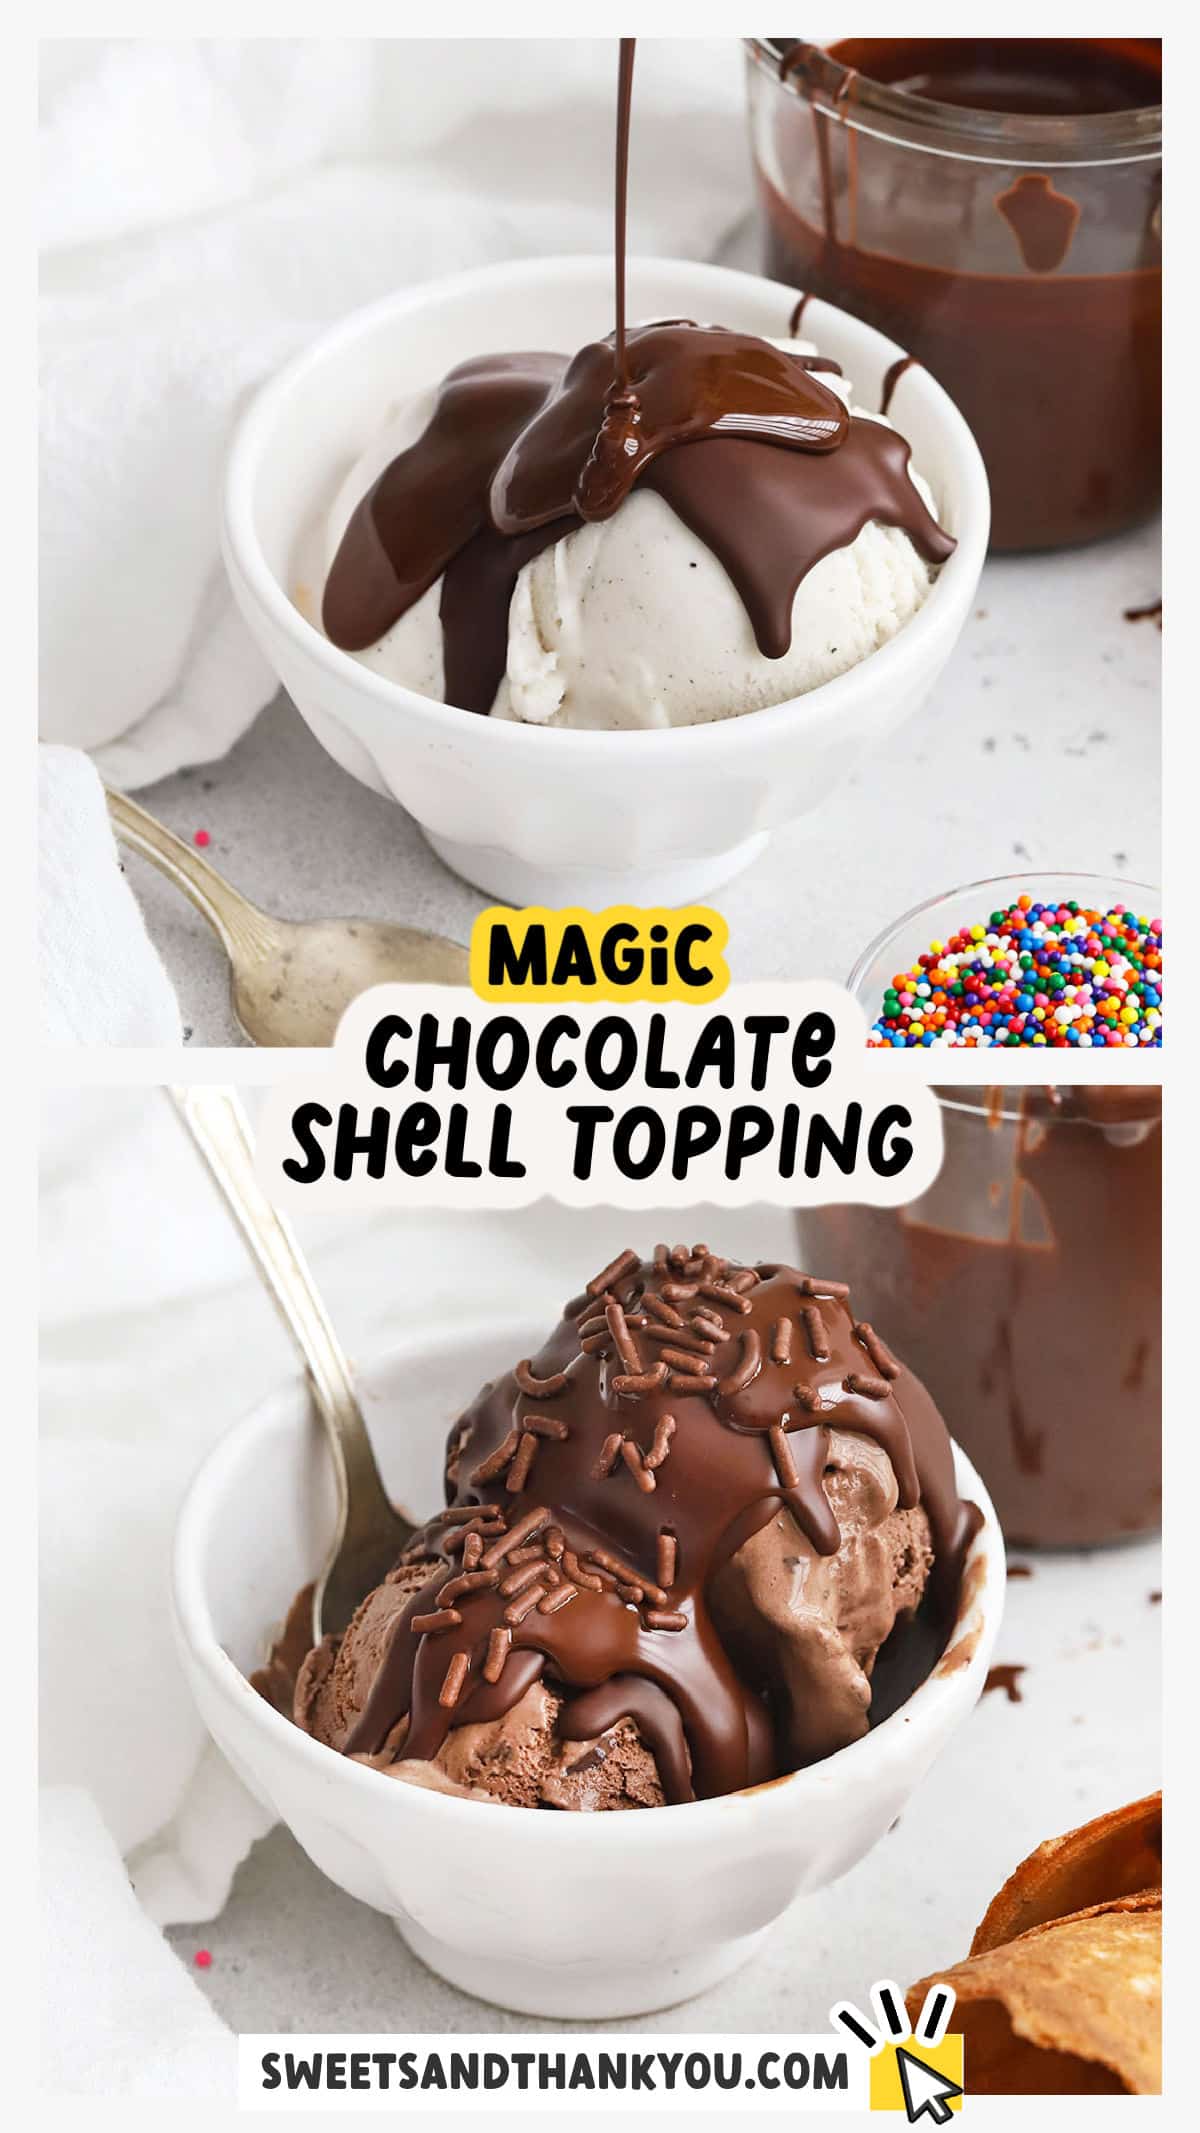 This summer, you have to try our easy 2-Ingredient Chocolate Shell For Ice Cream! This homemade magic shell topping recipe adds a perfect chocolatey crunch to your favorite scoop of ice cream! This yummy ice cream topping works perfectly on ice cream cones, sundaes, and other frozen treats (like banana pops, homemade trufru, and more). Best of all, you can easily make it as vegan chocolate shell using dairy-free chocolate chips! 